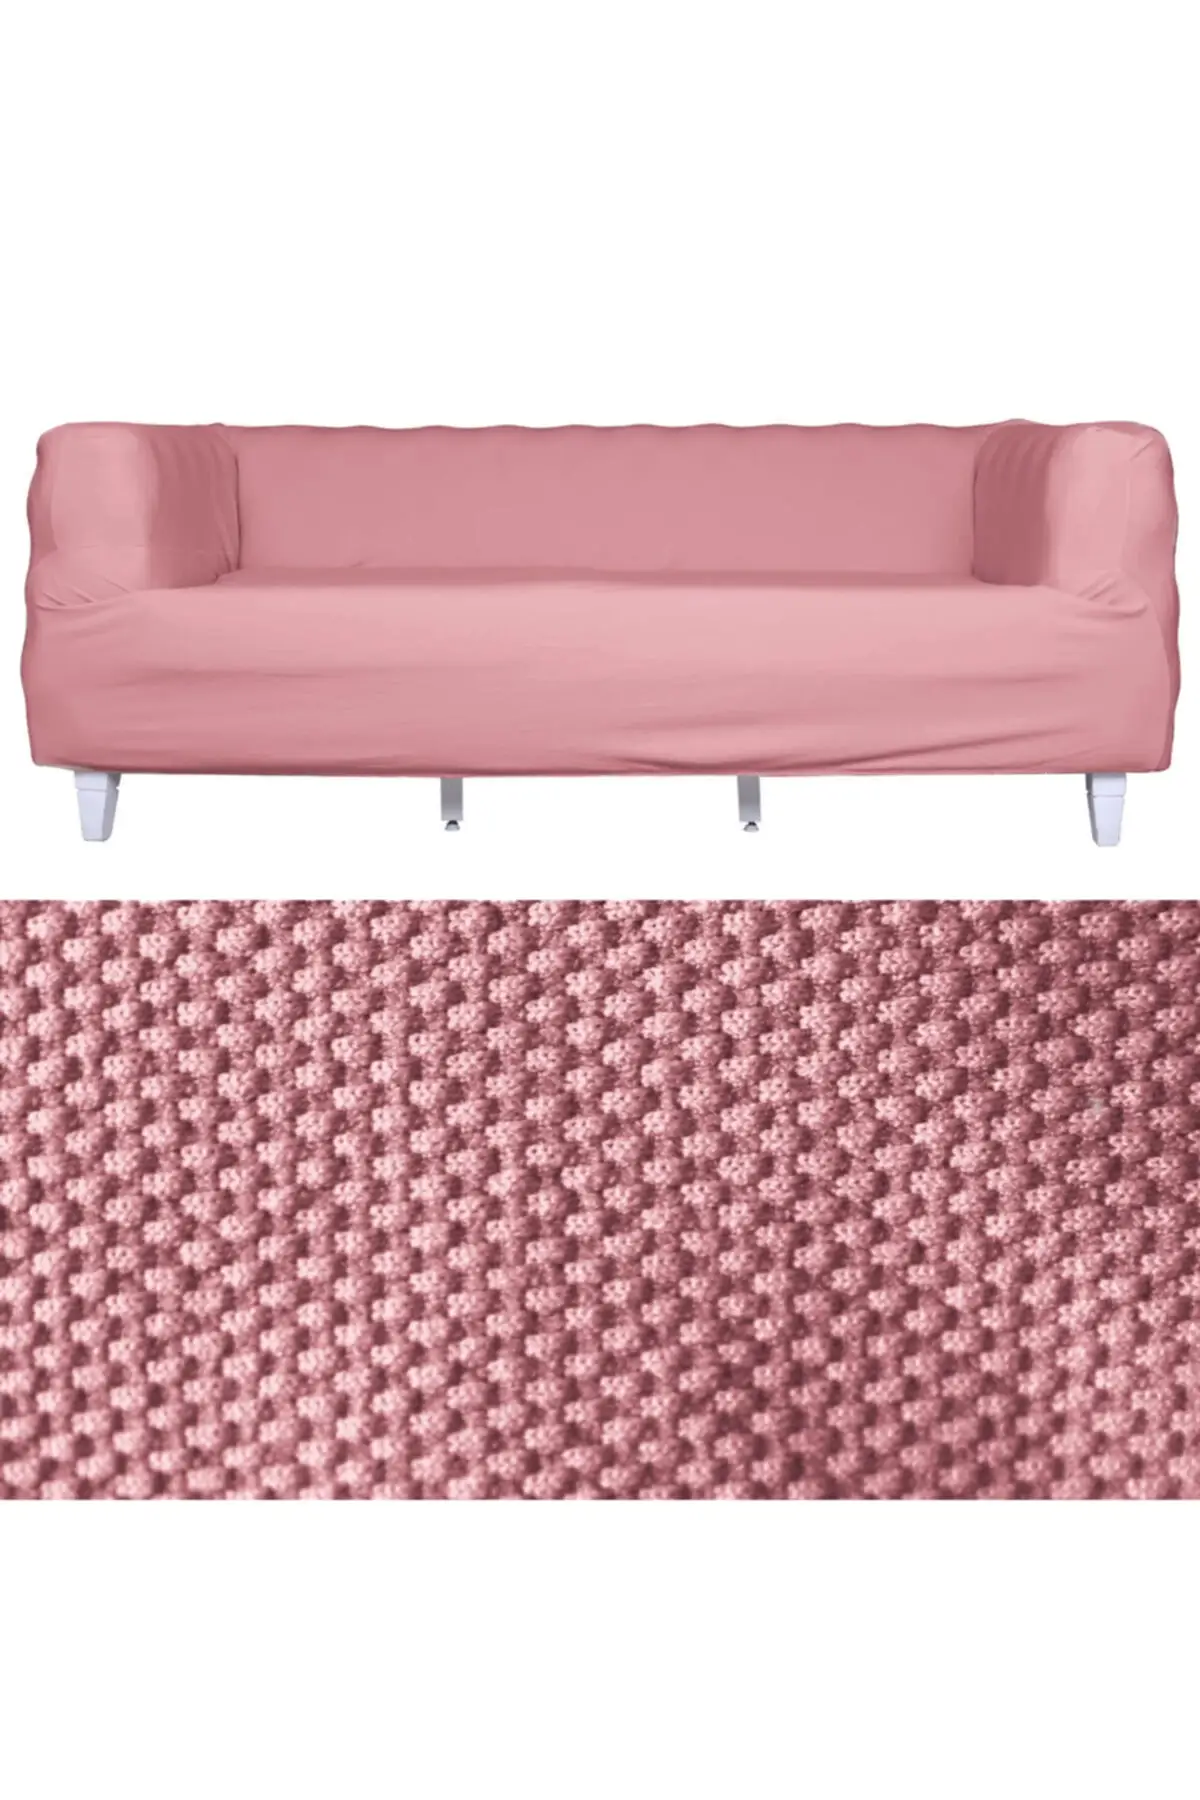 

Honey Honeycomb Fabric Lycra Flexible Loosable Tires 3 * seater Chester Seat Cover (single) Polyester 230x180 Pink